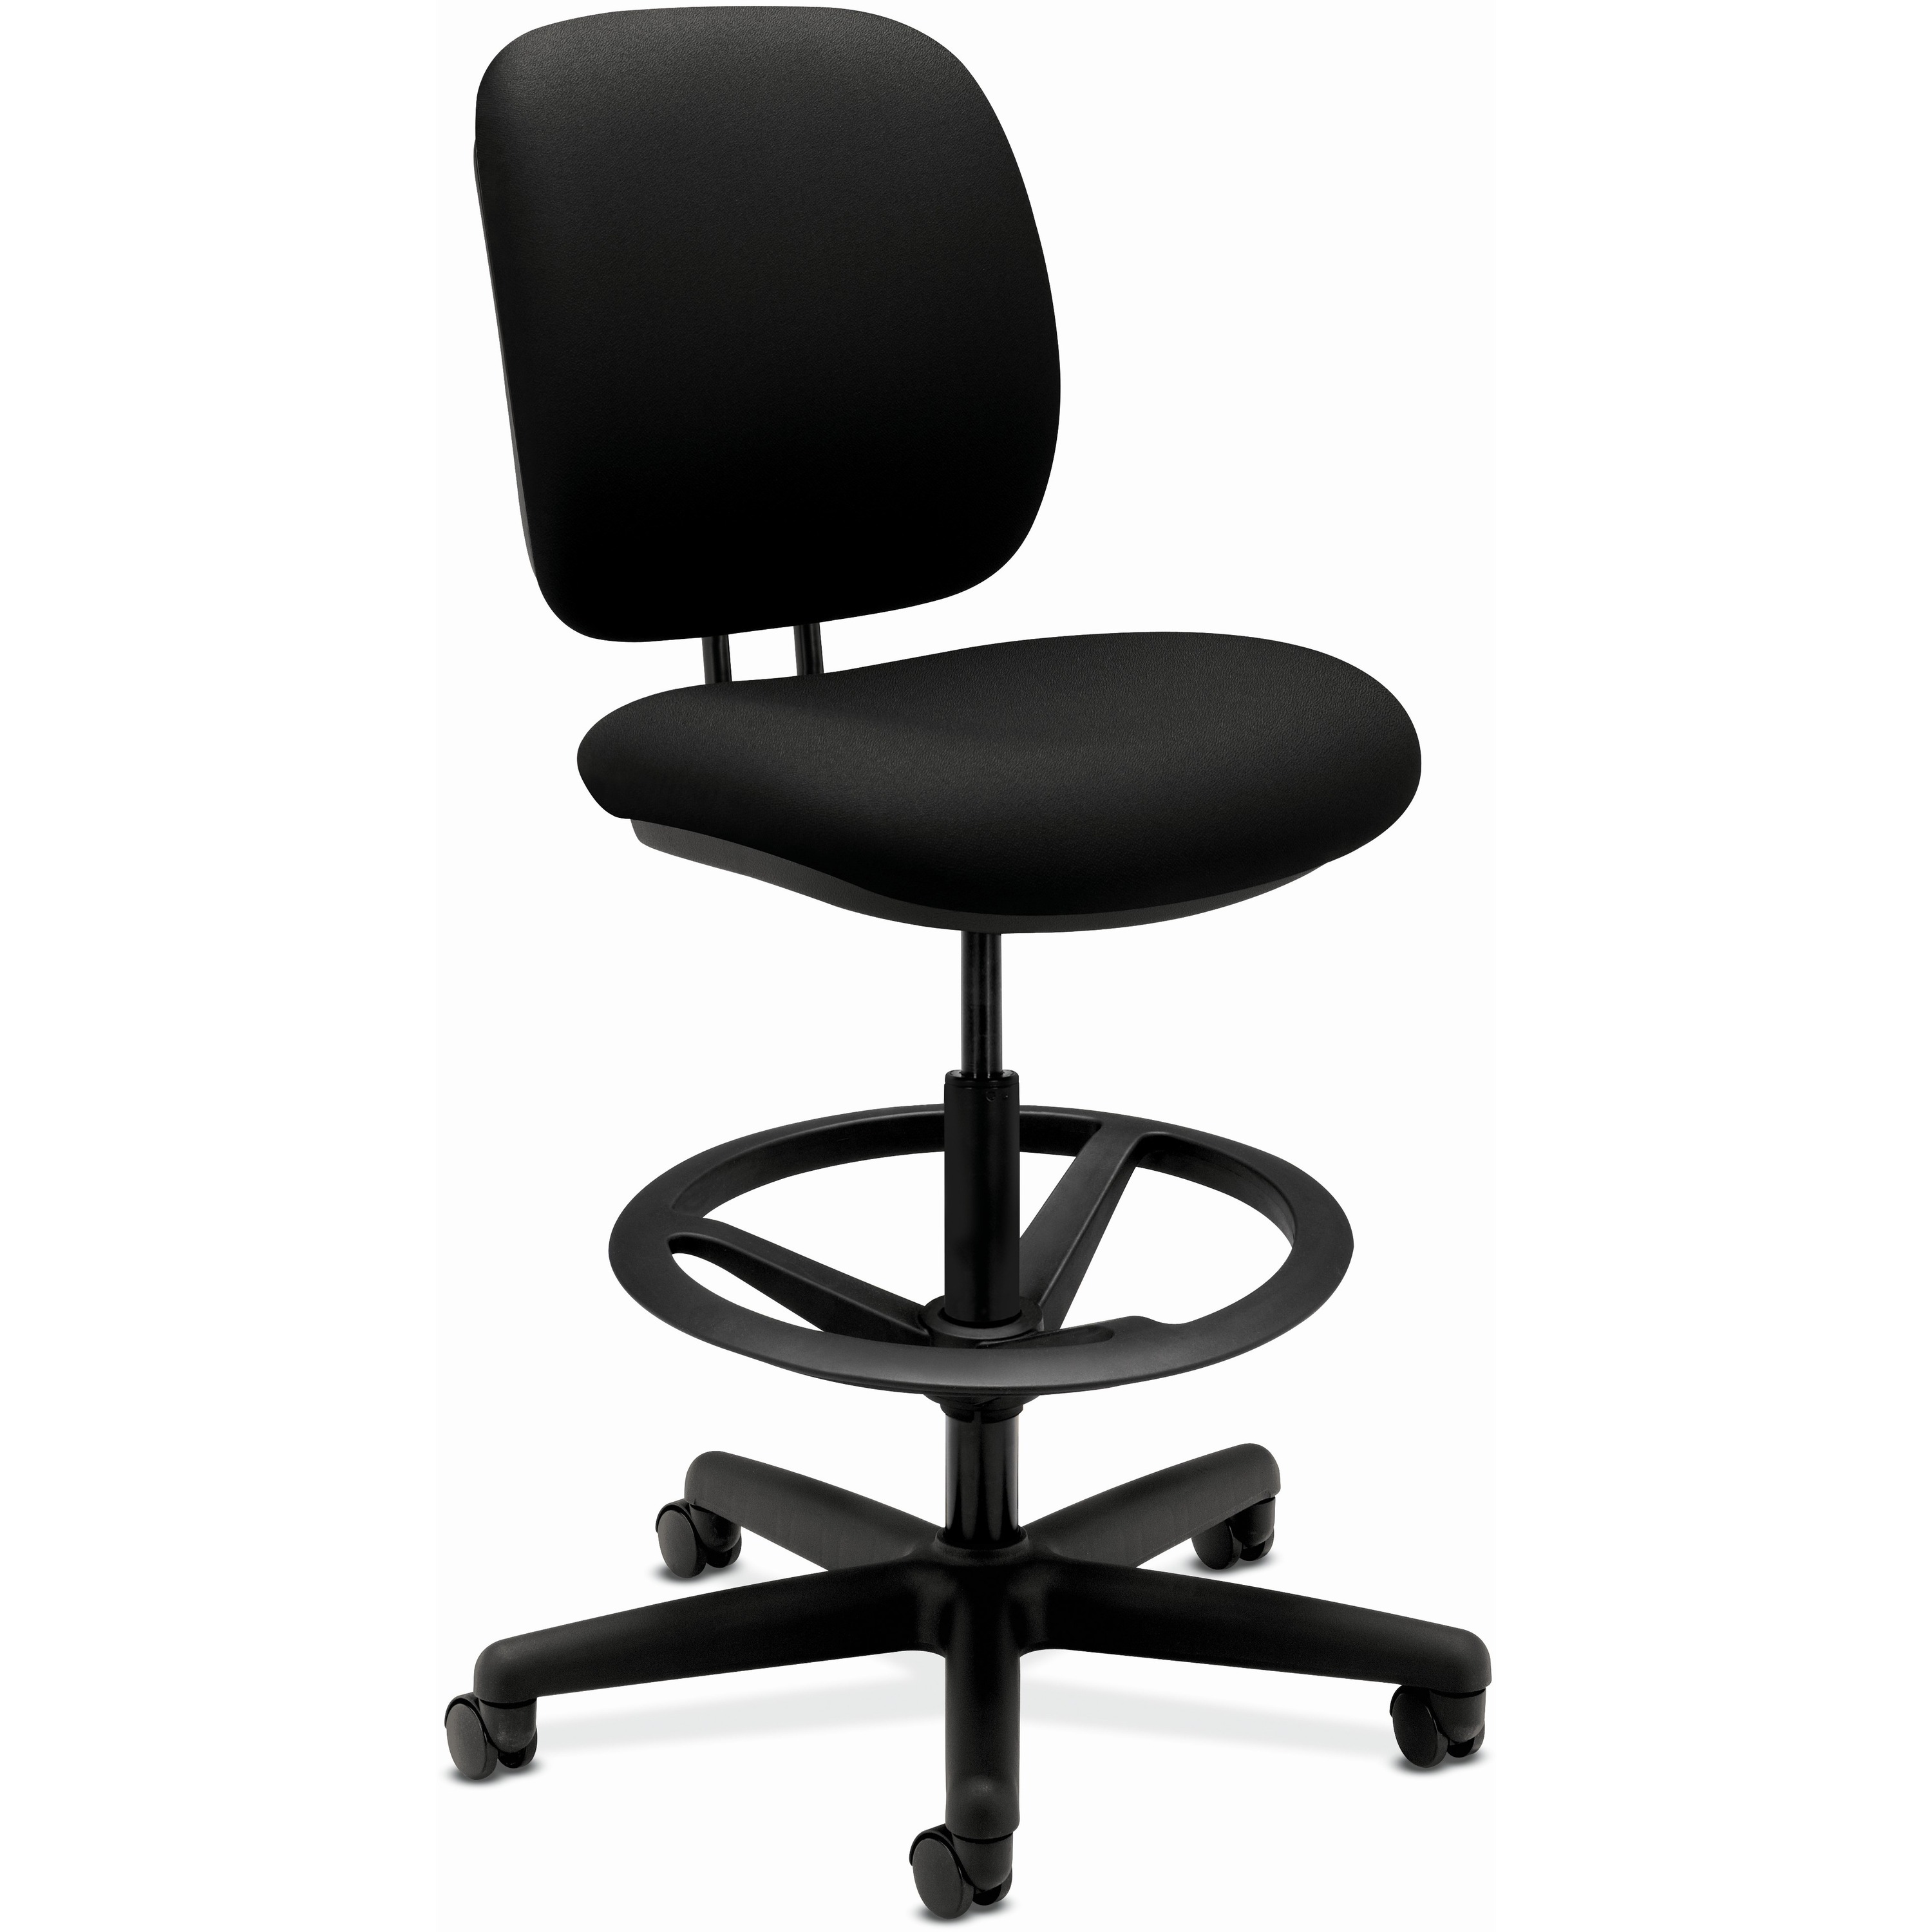 Kamloops Office Systems :: Furniture :: Chairs, Chair Mats & Accessories ::  Chairs :: Stools & Drafting Chairs :: HON ComforTask Stool | Extended  Height, Footring | Black Fabric - Black Polyester,